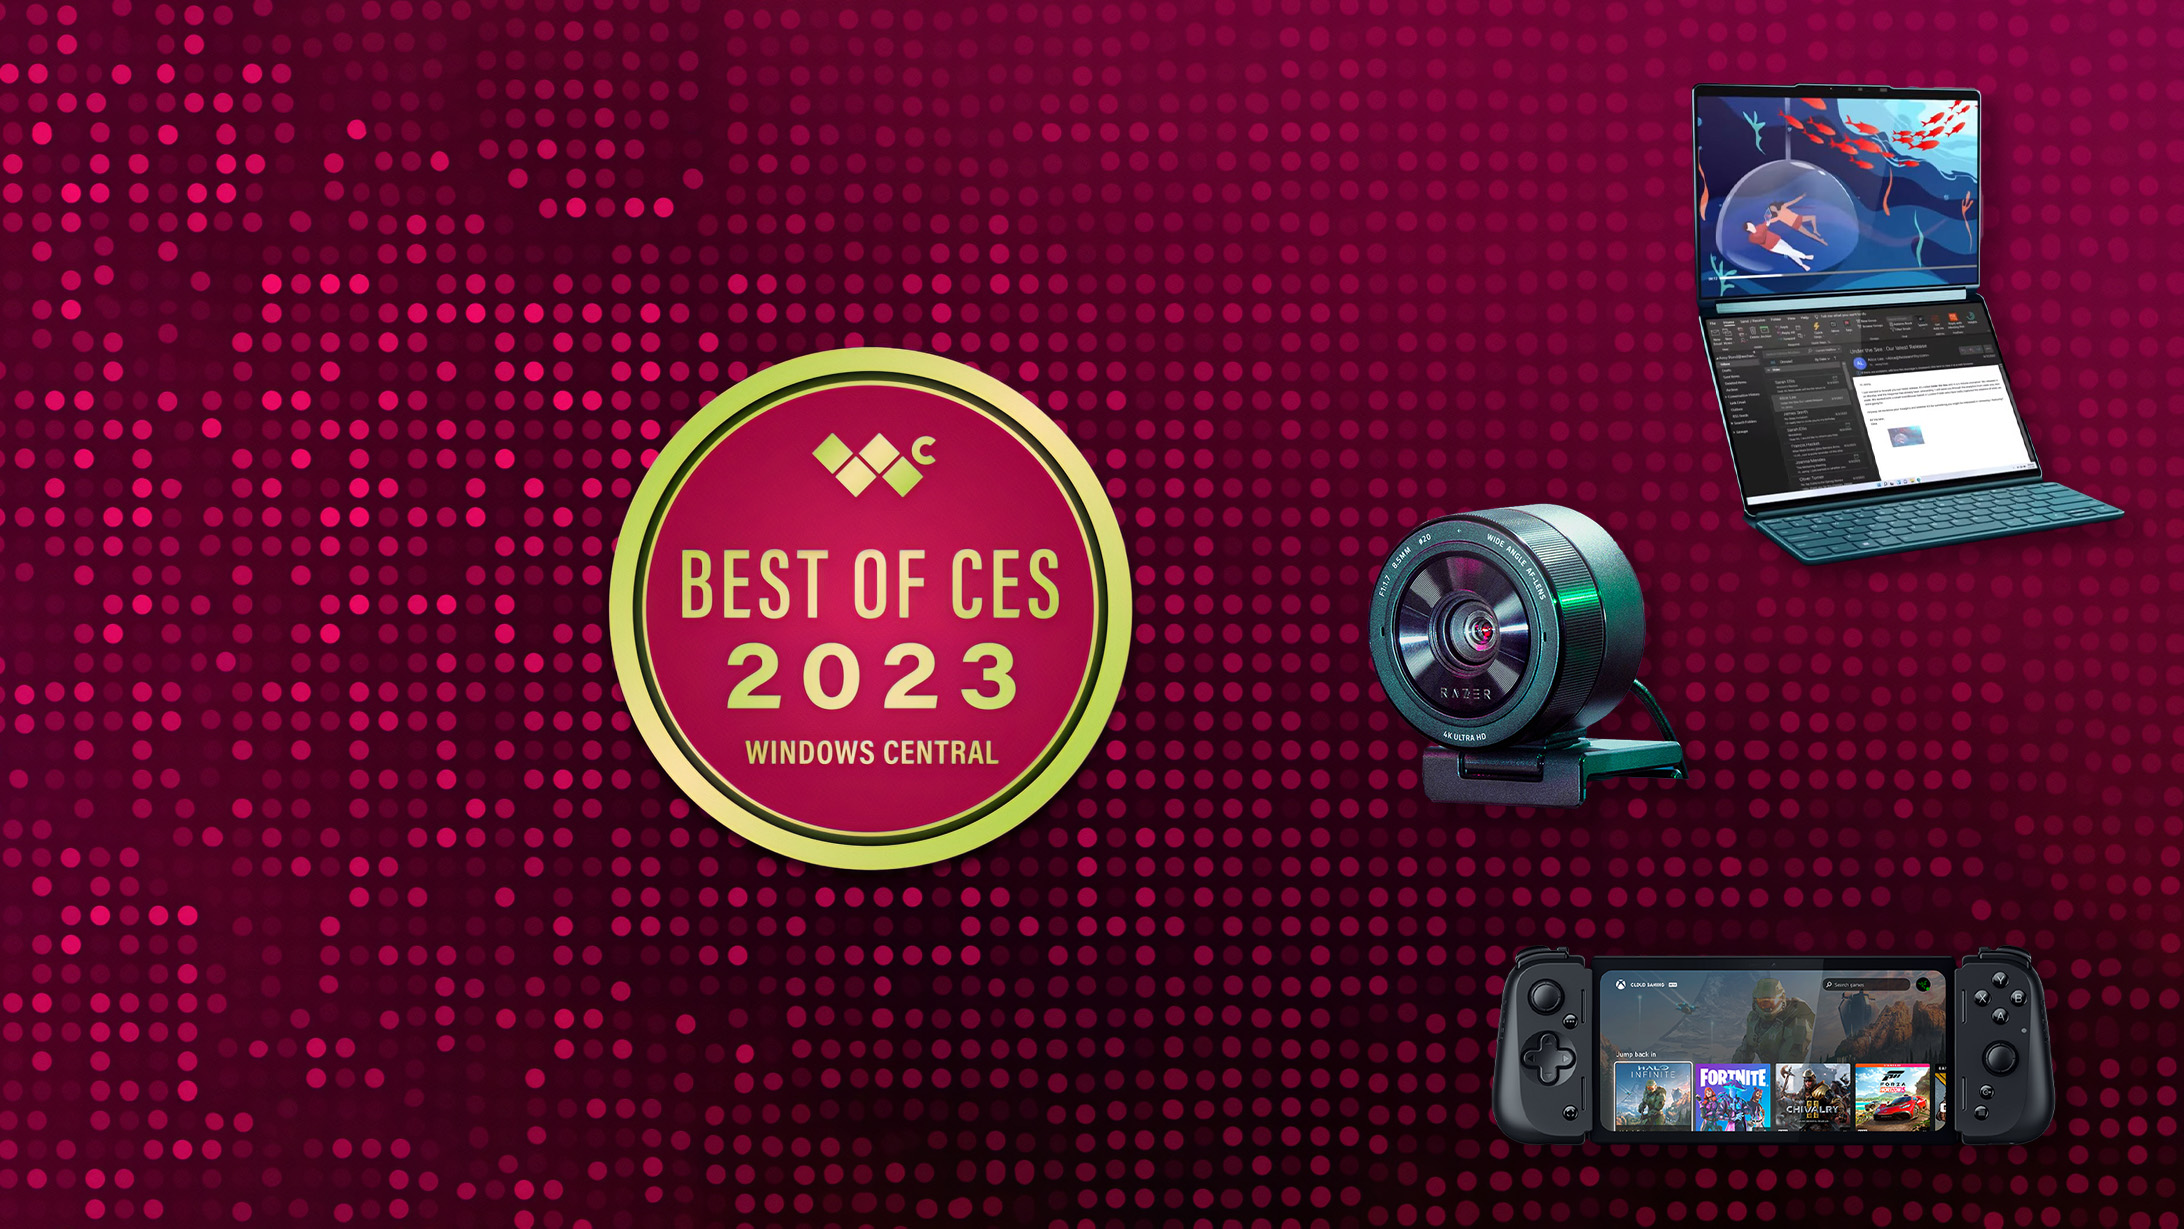 Windows Central's Best of CES 2023 Awards The best of future tech